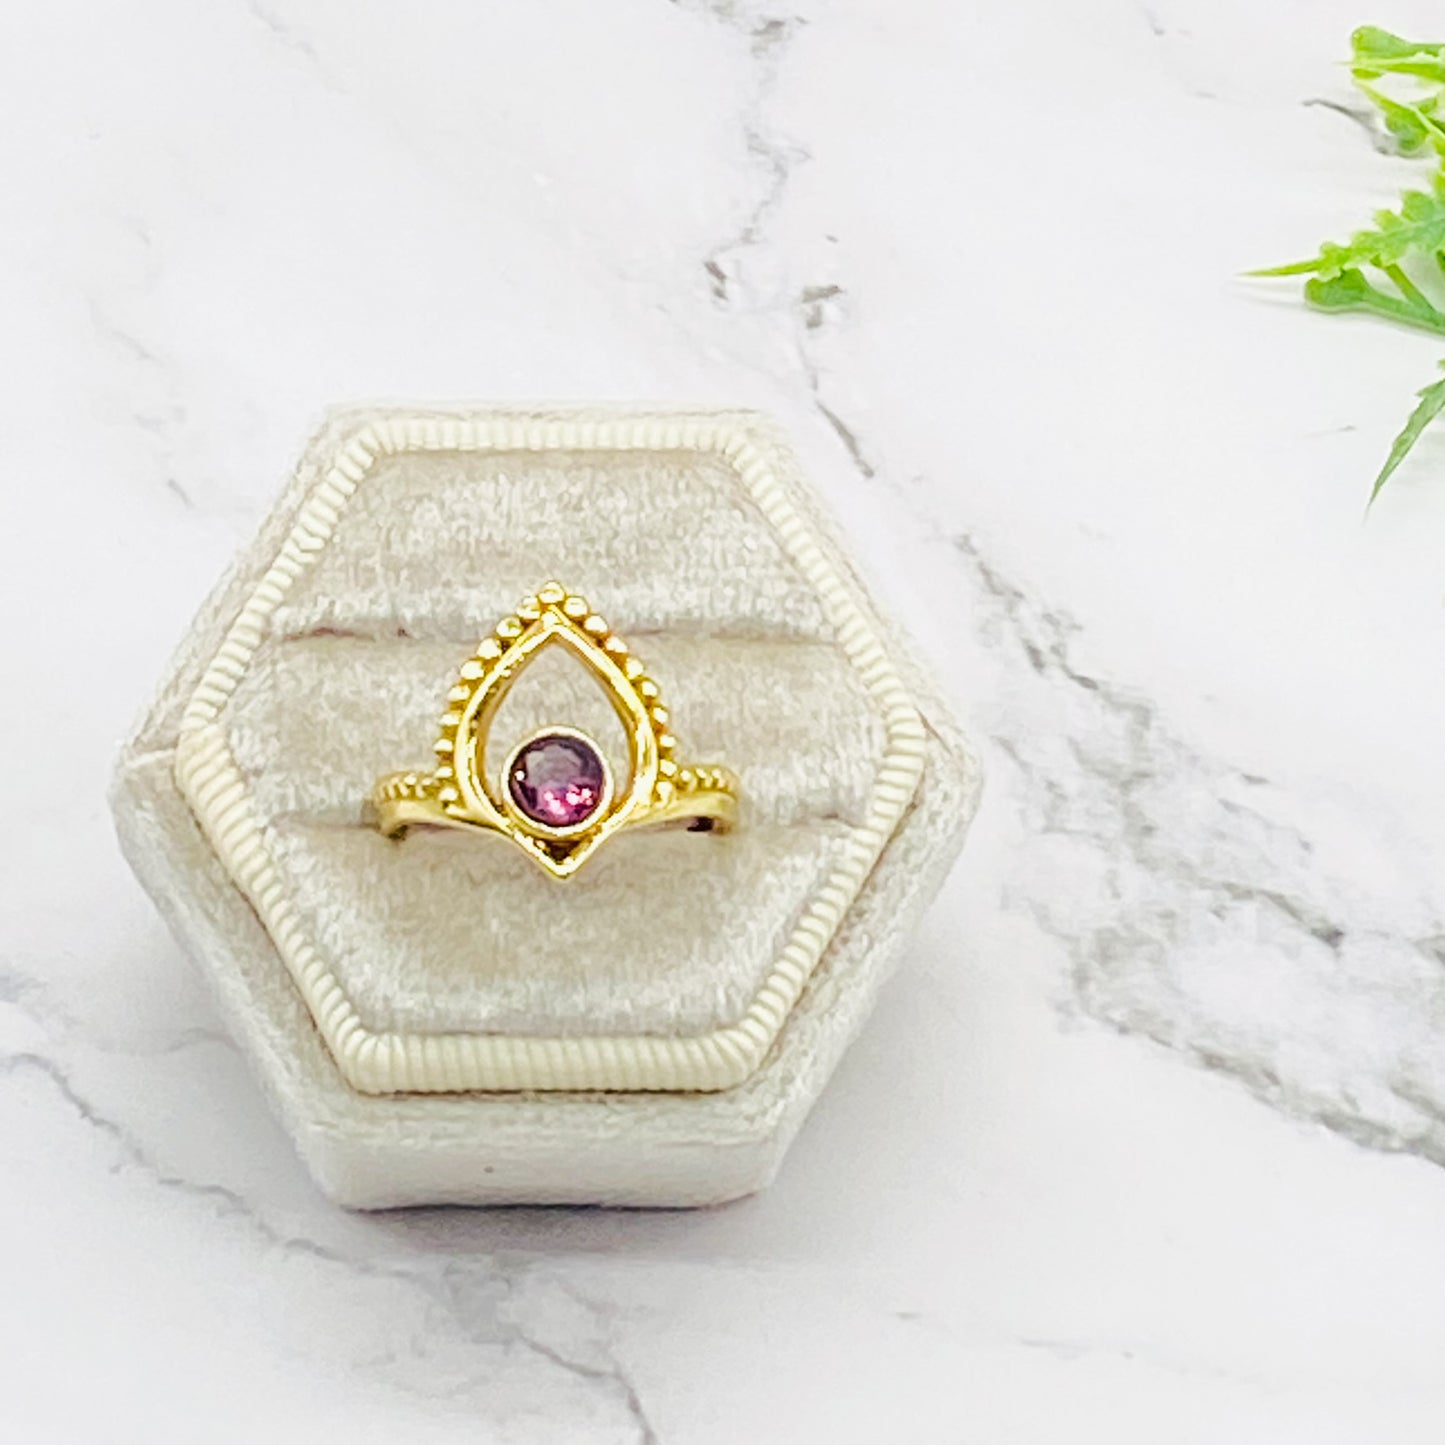 Gold Filled Crystal Ring, Handmade Ring, Gift For Her, Statement Ring, Gift for Mom, Statement Ring, Vintage Jewelry